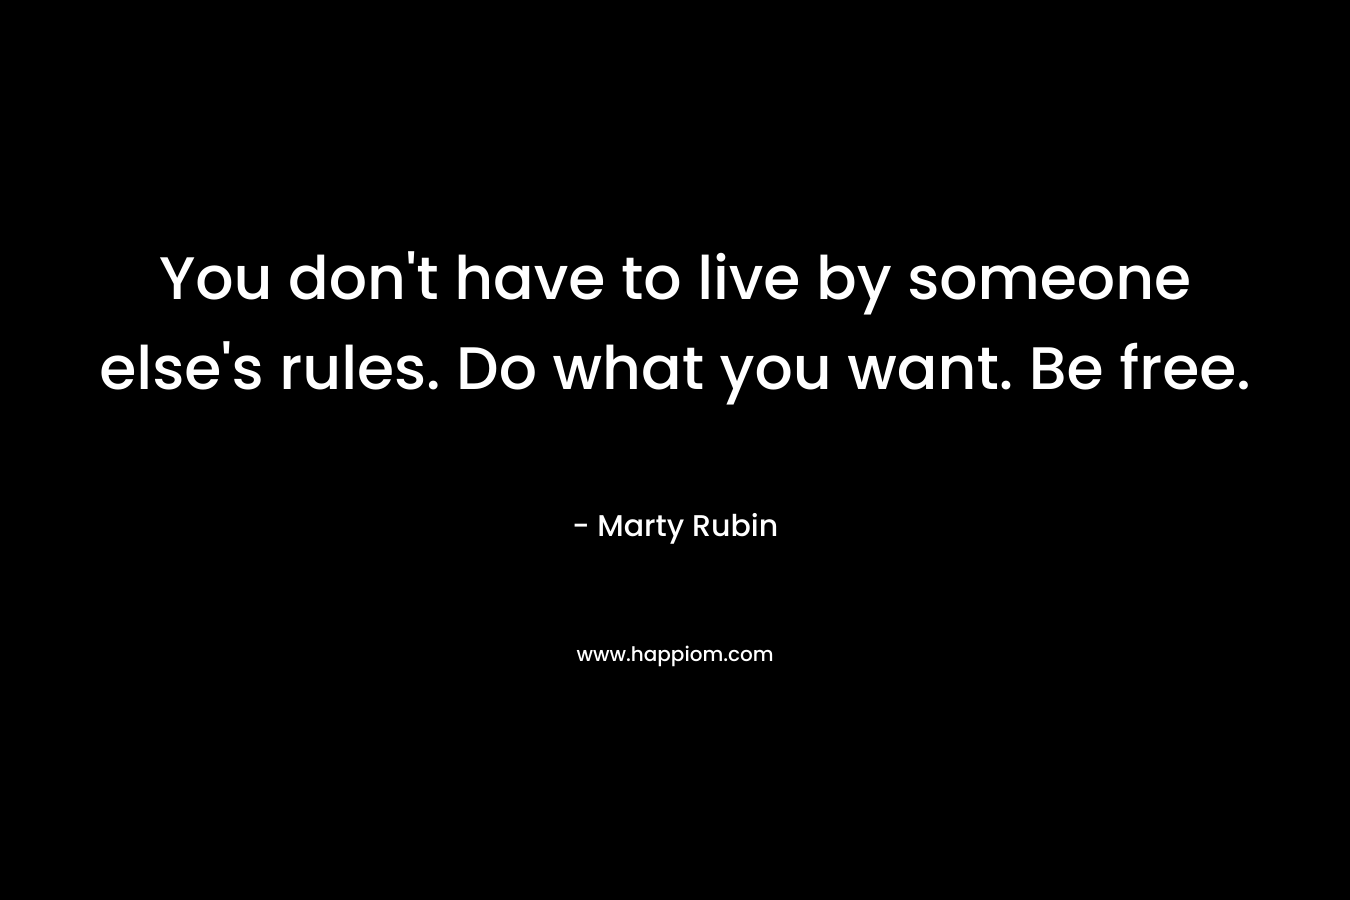 You don't have to live by someone else's rules. Do what you want. Be free.